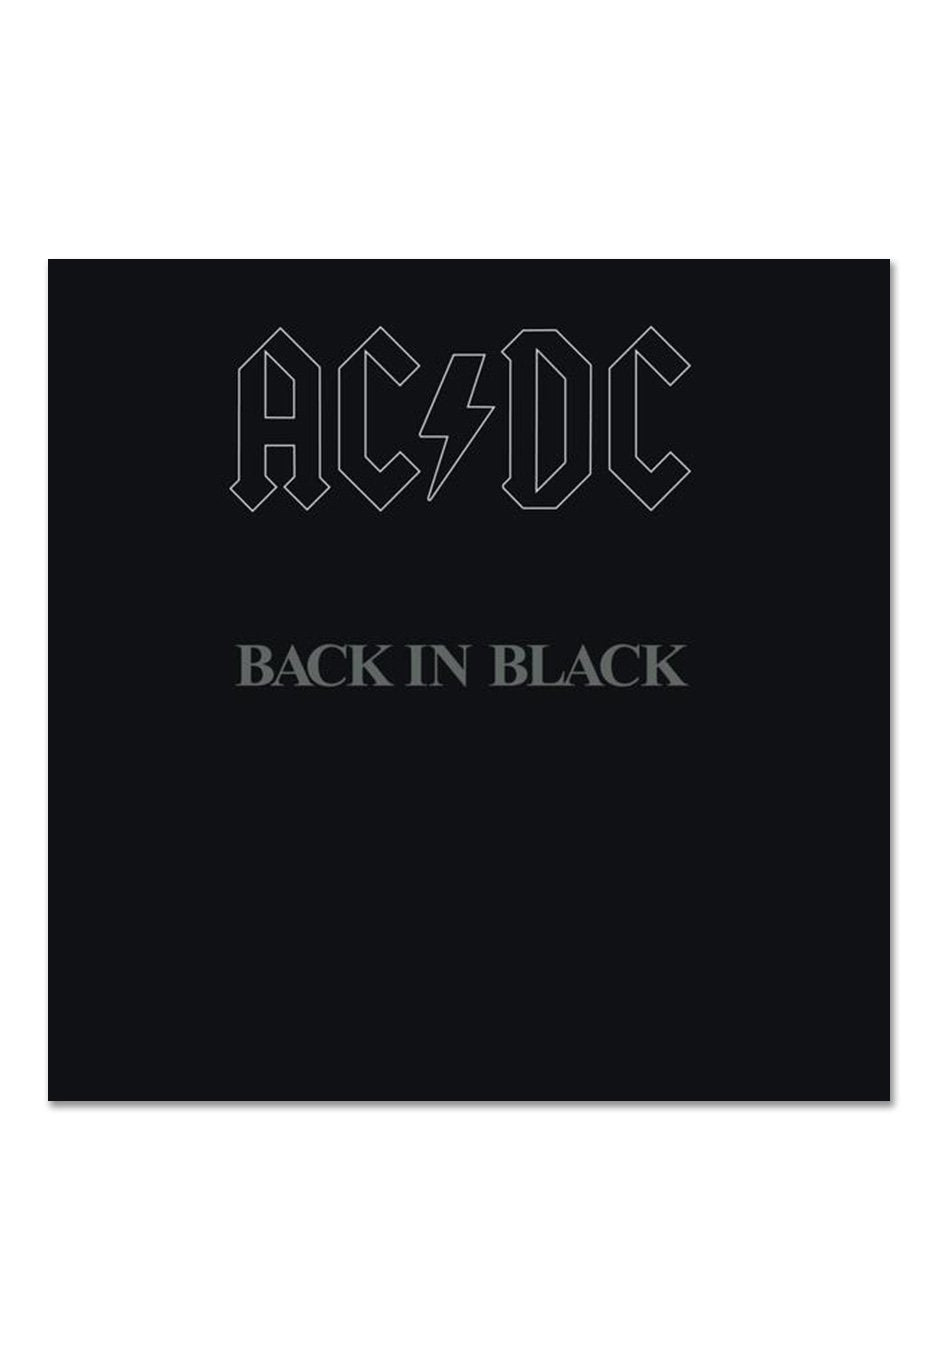 AC/DC - Back In Black (Limited 50th Anniversary Edition) Gold - Colored Vinyl